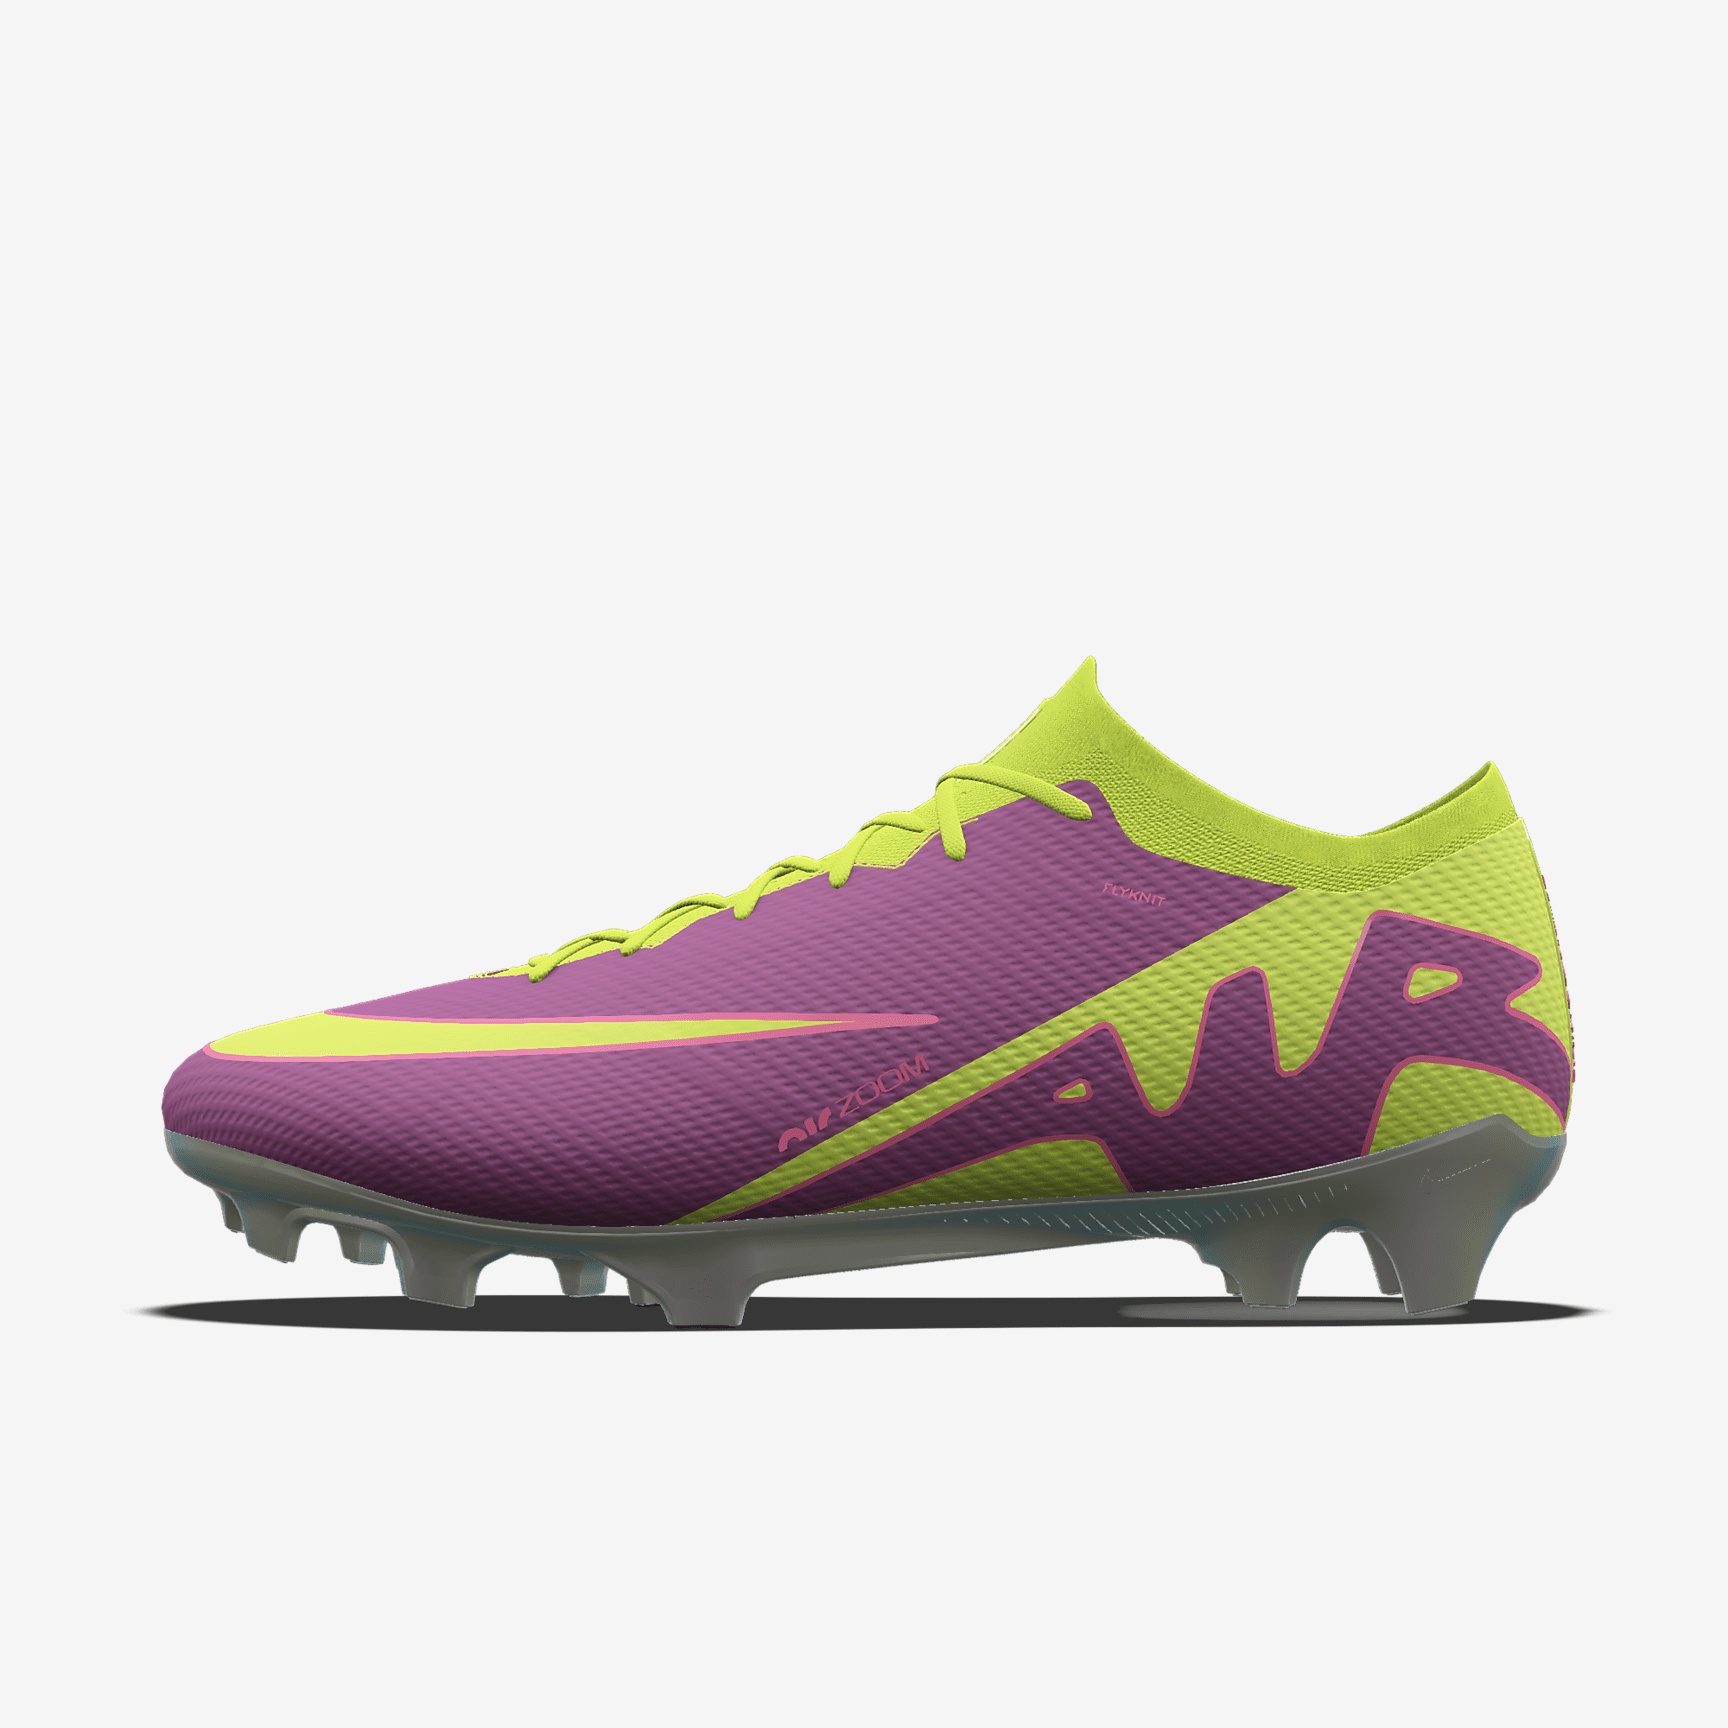 Nike Mercurial Vapor 15 Elite By You Custom Firm-Ground Soccer Cleats - 1